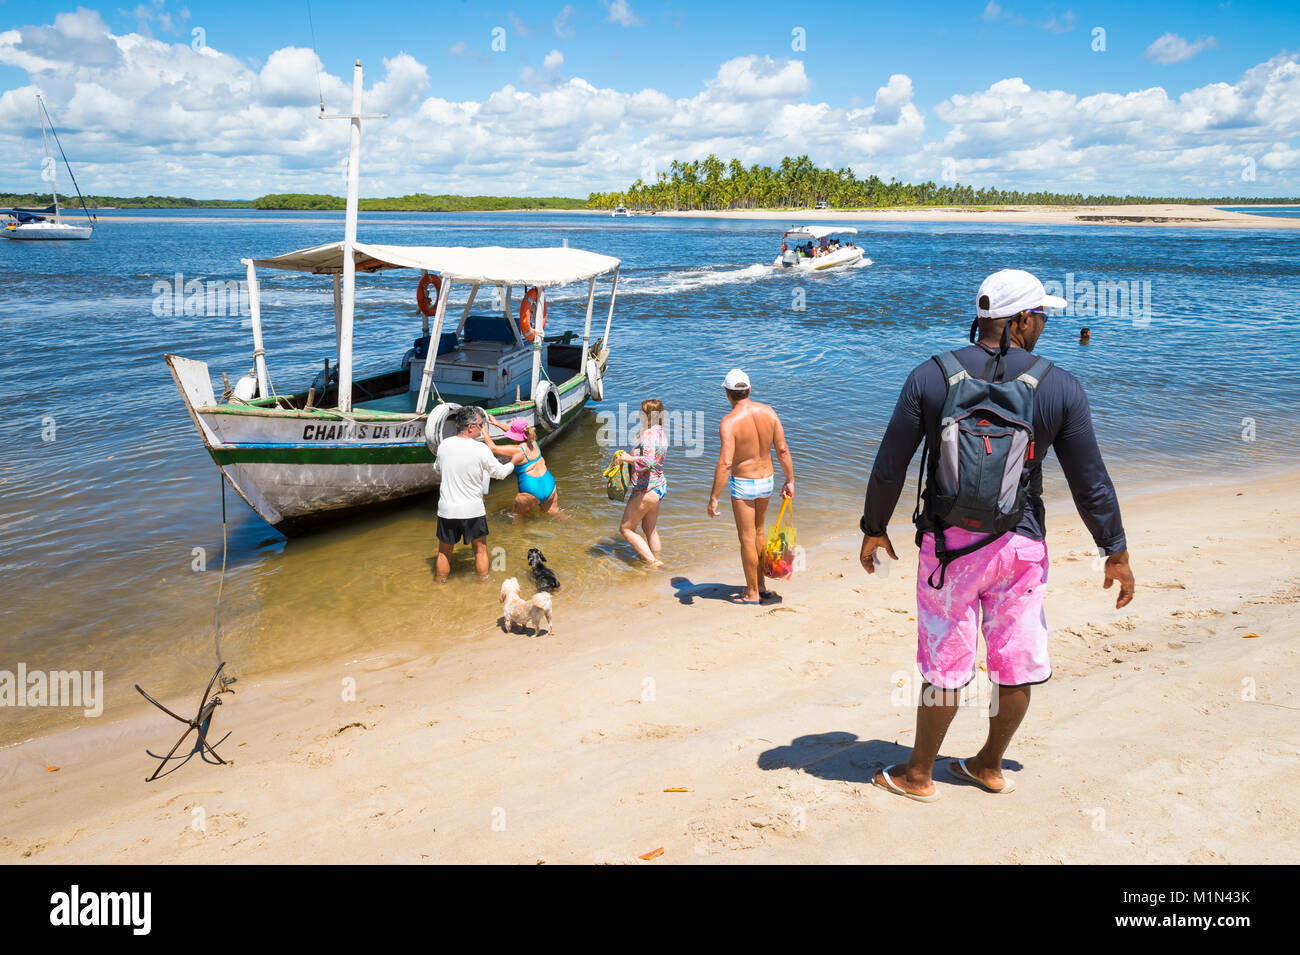 CAIRU, BRAZIL - FEBRUARY 15, 2017: A Brazilian boat captain waits for tourists to board for a day trip. Stock Photo